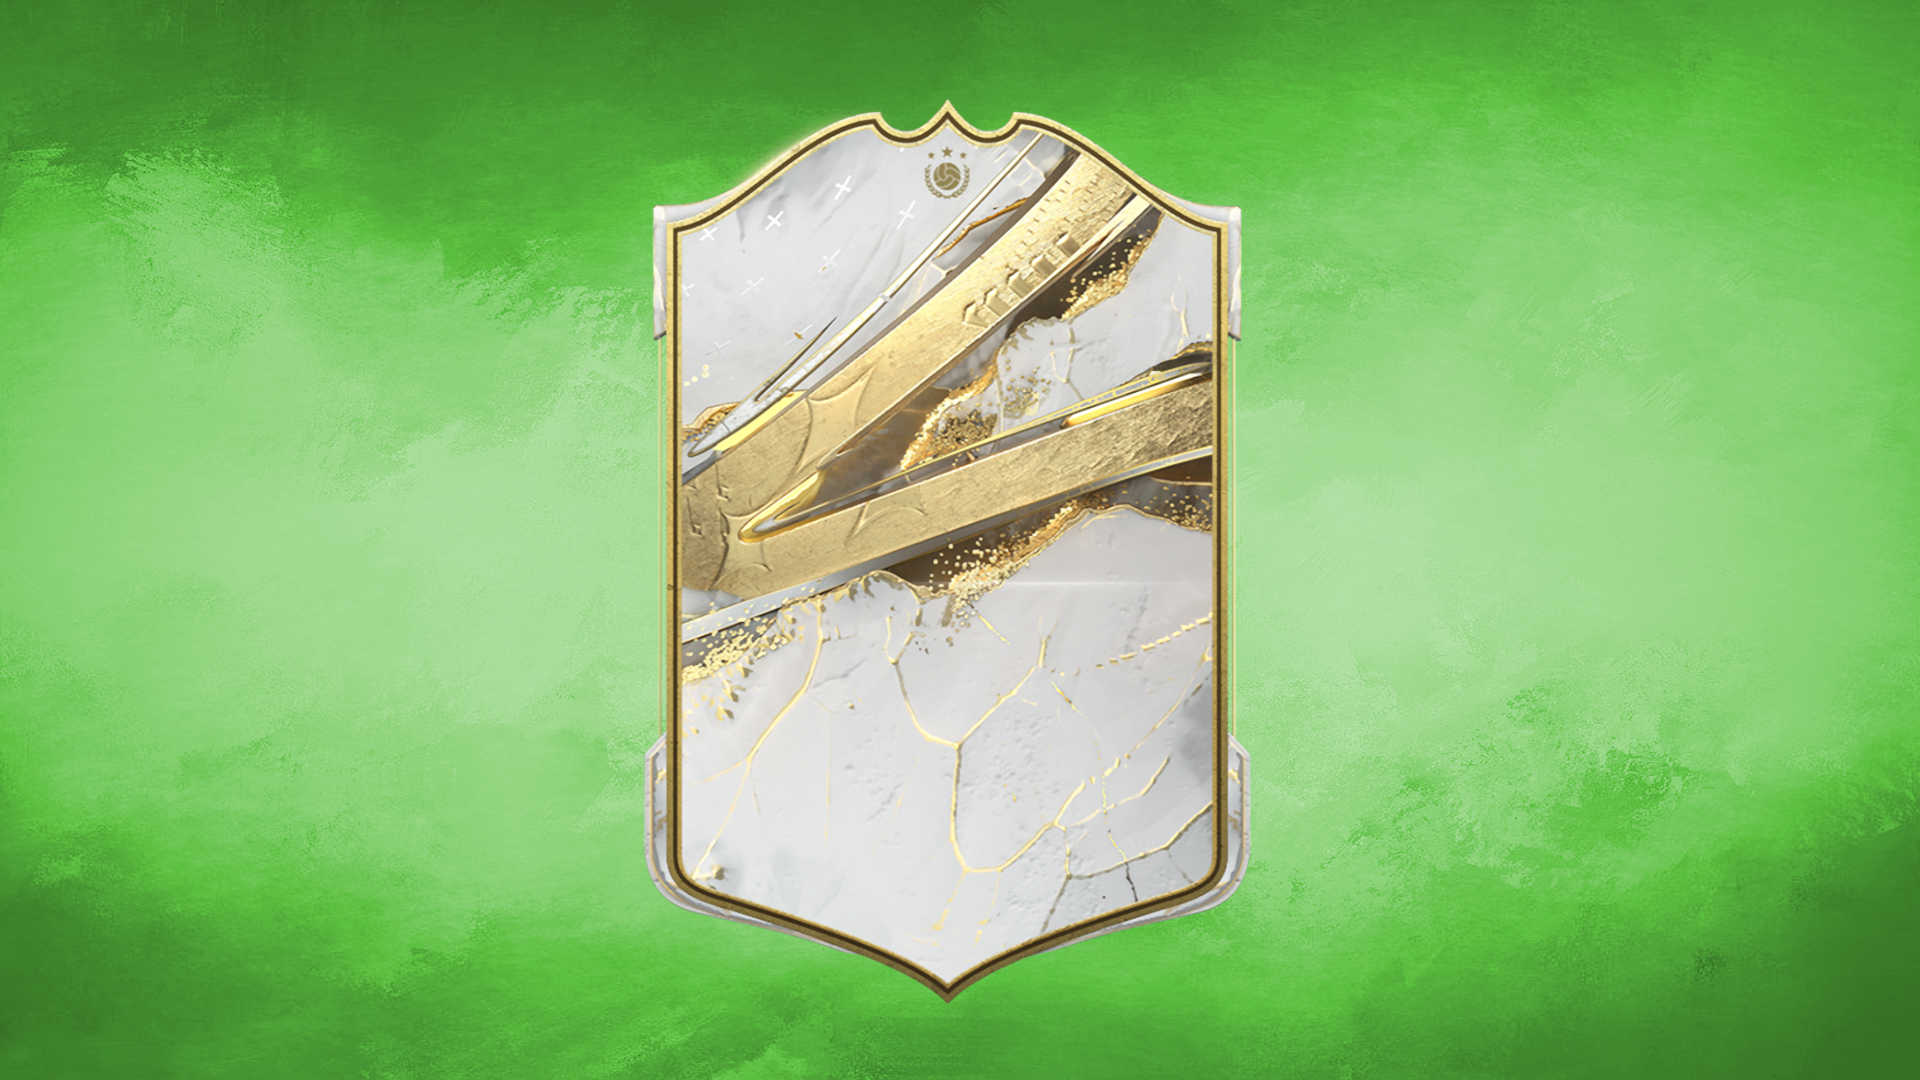 FIFA 23: new Icon SBC leaked (it will probably be more exciting than the previous ones)